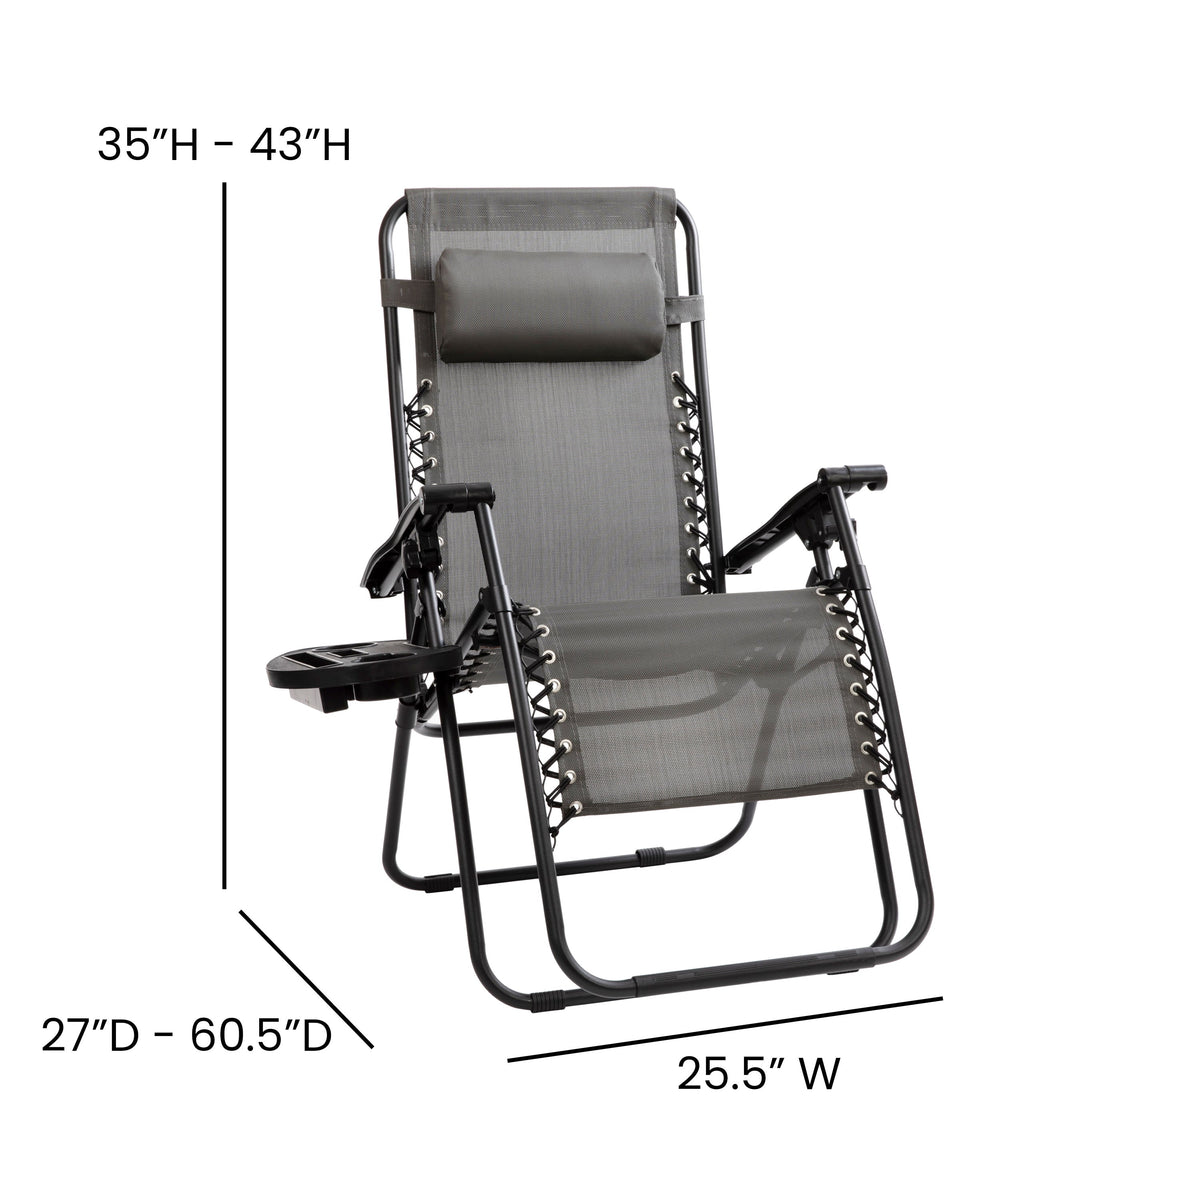 Gray |#| 2 Pack Adjustable Mesh Zero Gravity Lounge Chair with Cup Holder Tray - Gray